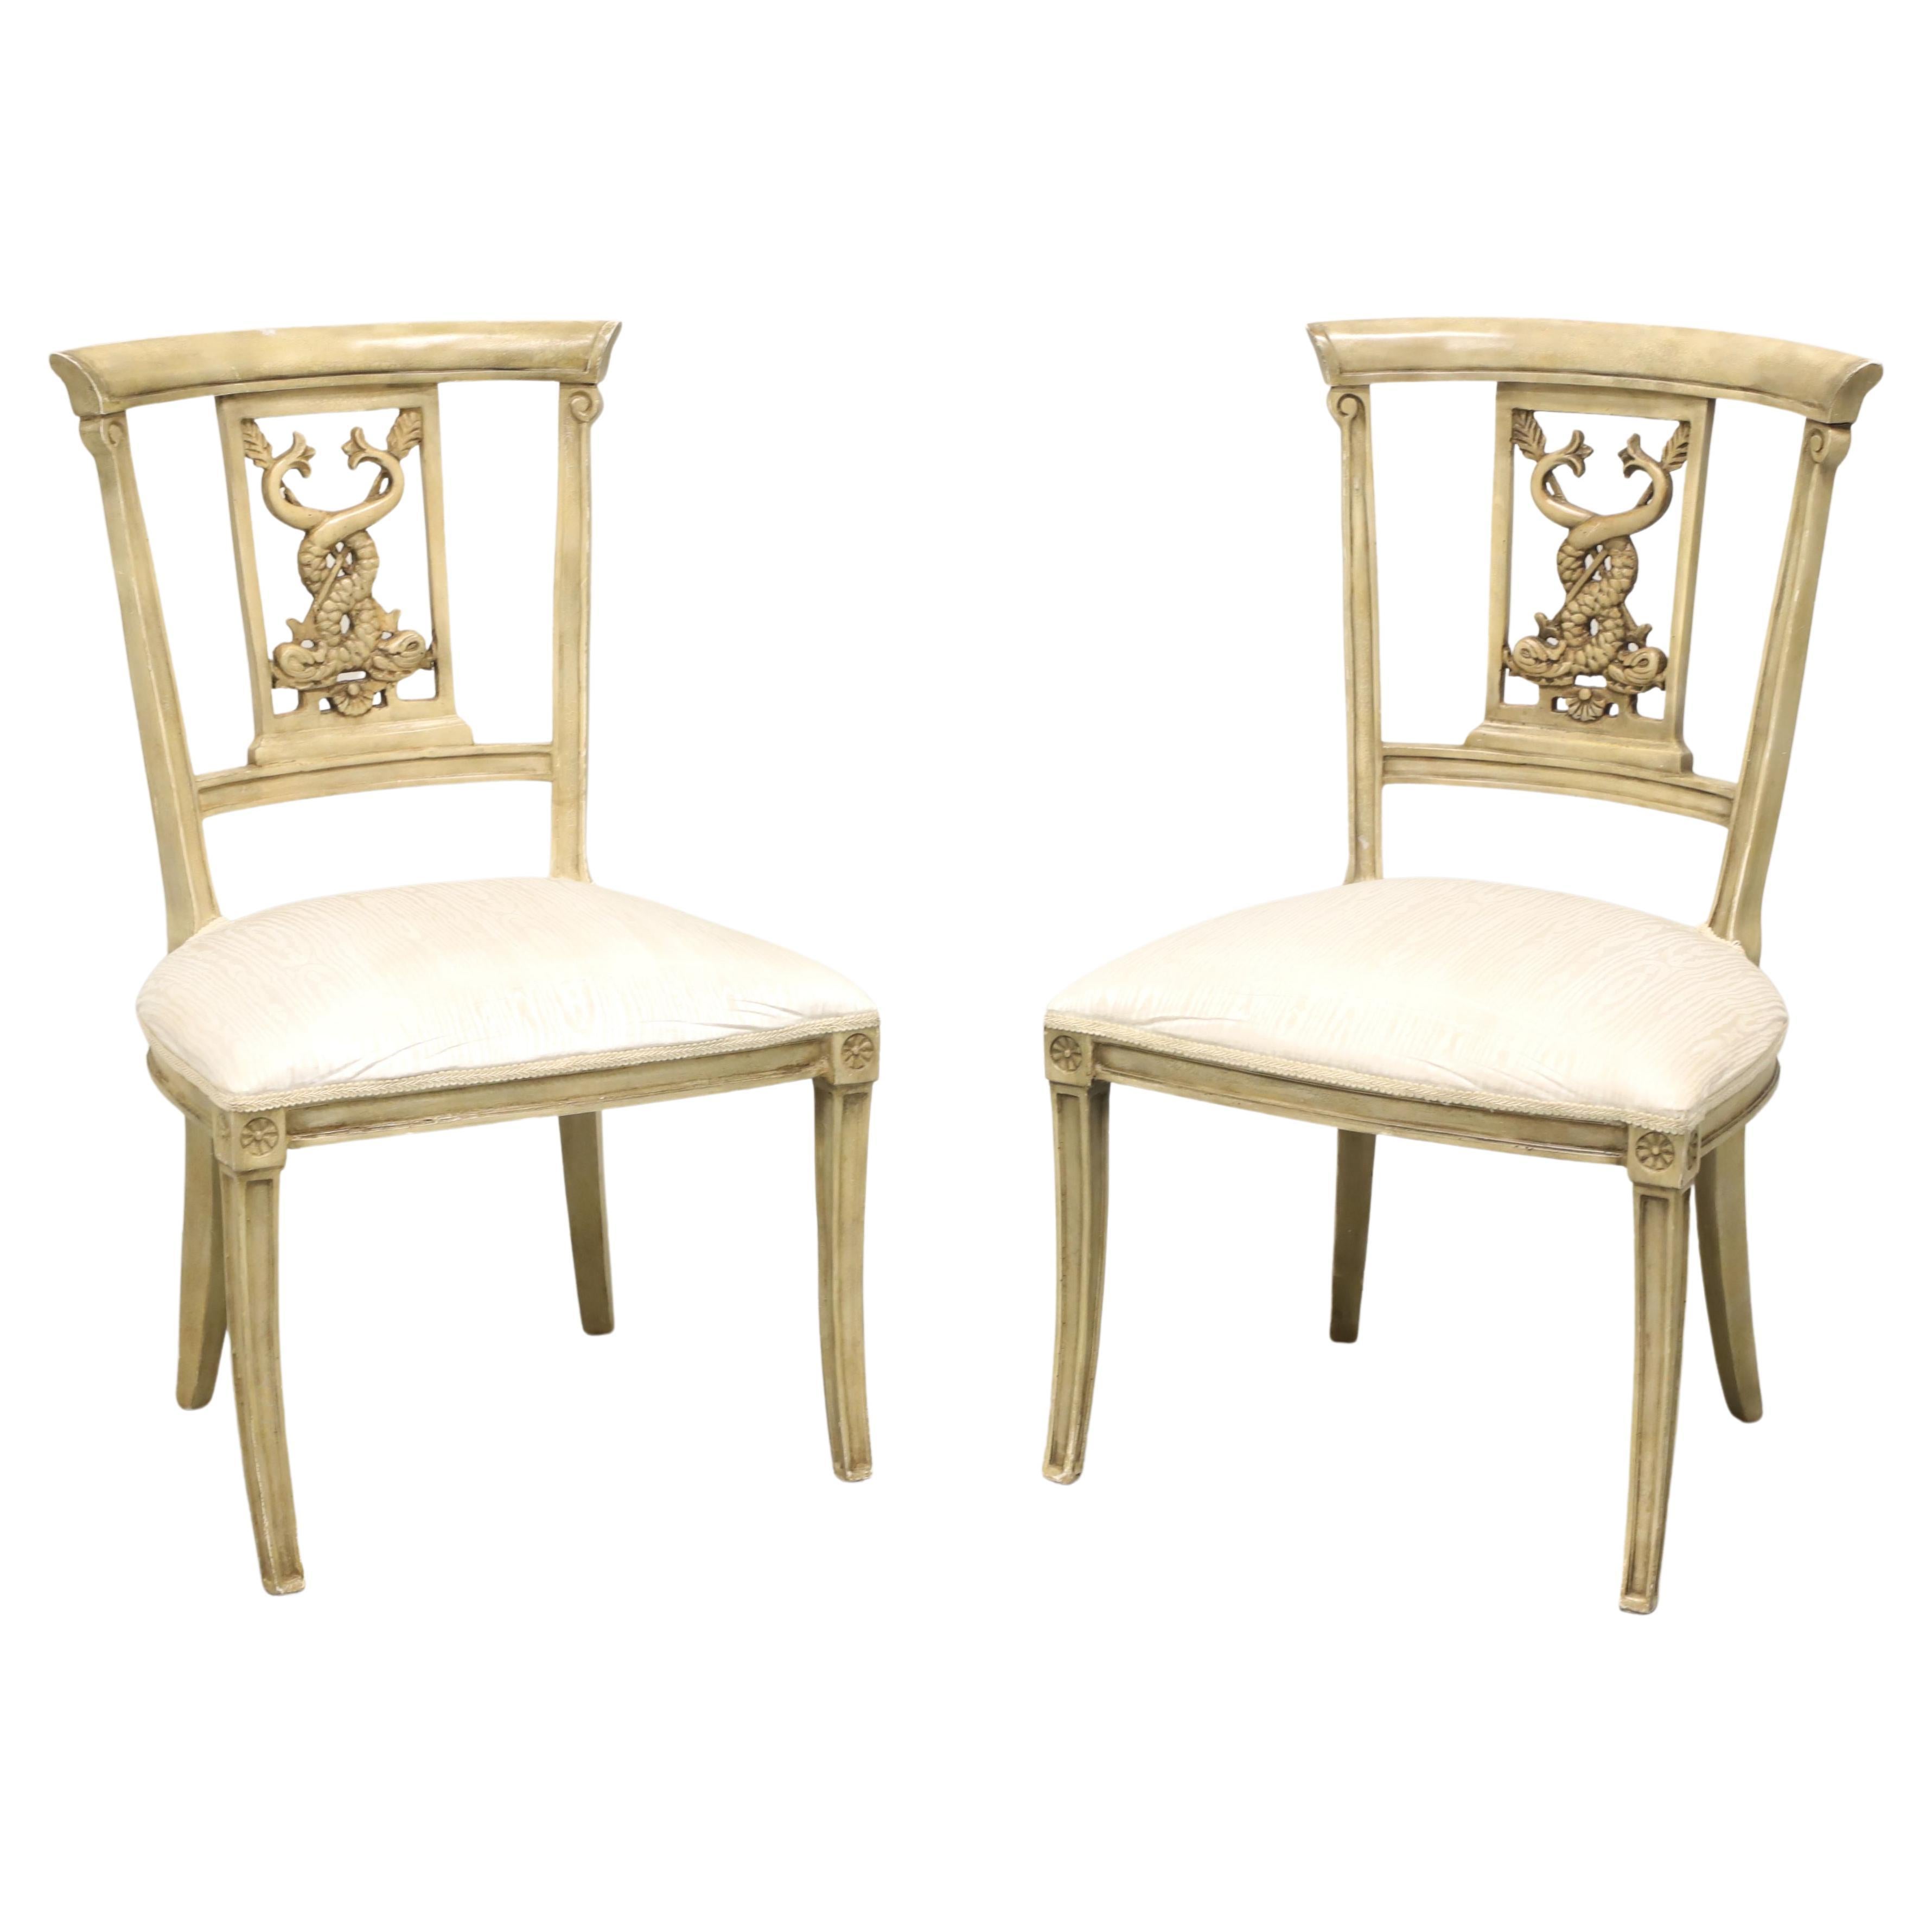 20th Century Italian Impero Style Side Chairs - Pair